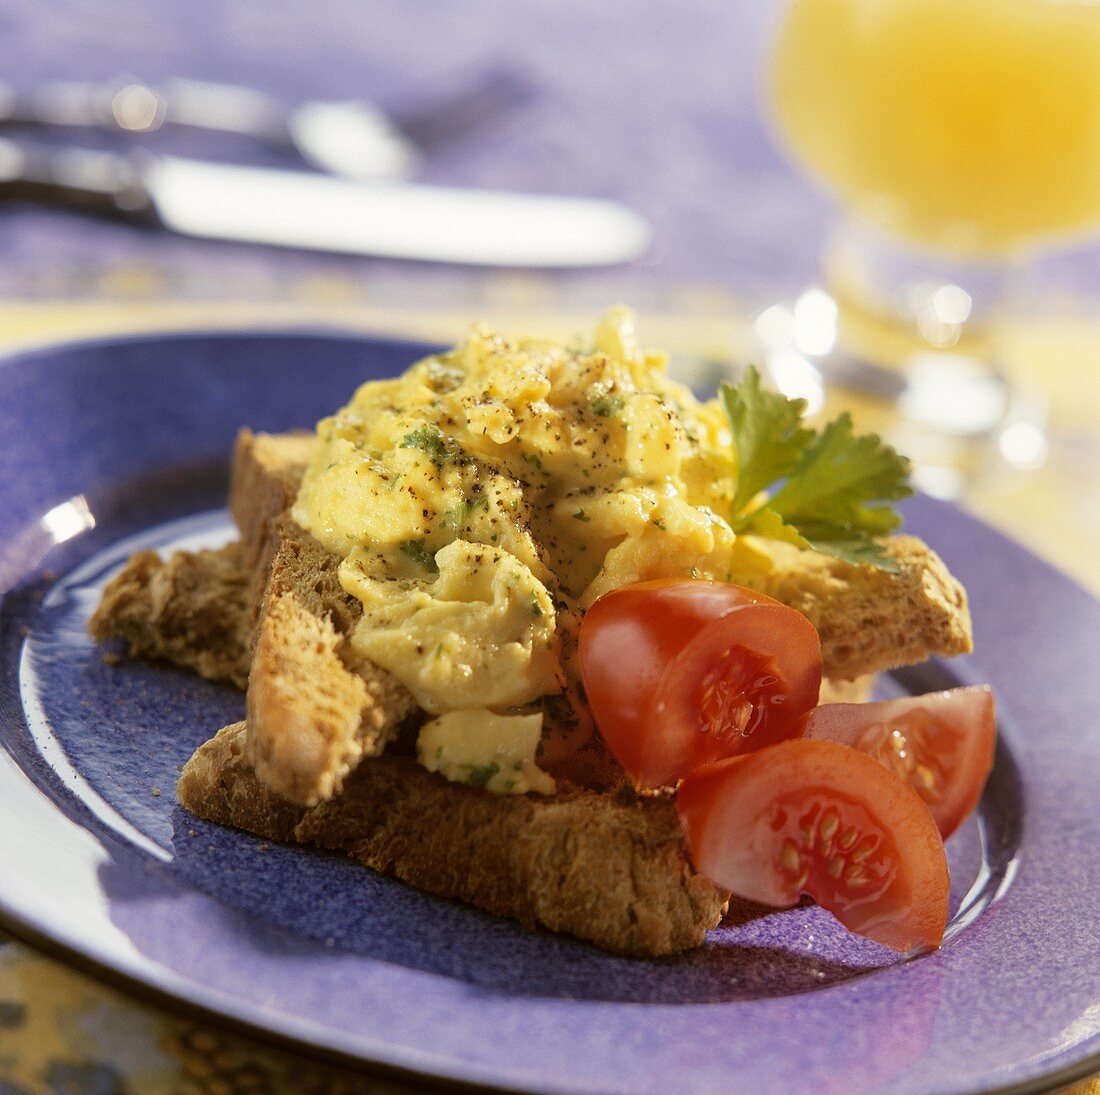 Scrambled egg and tomato on wholemeal bread